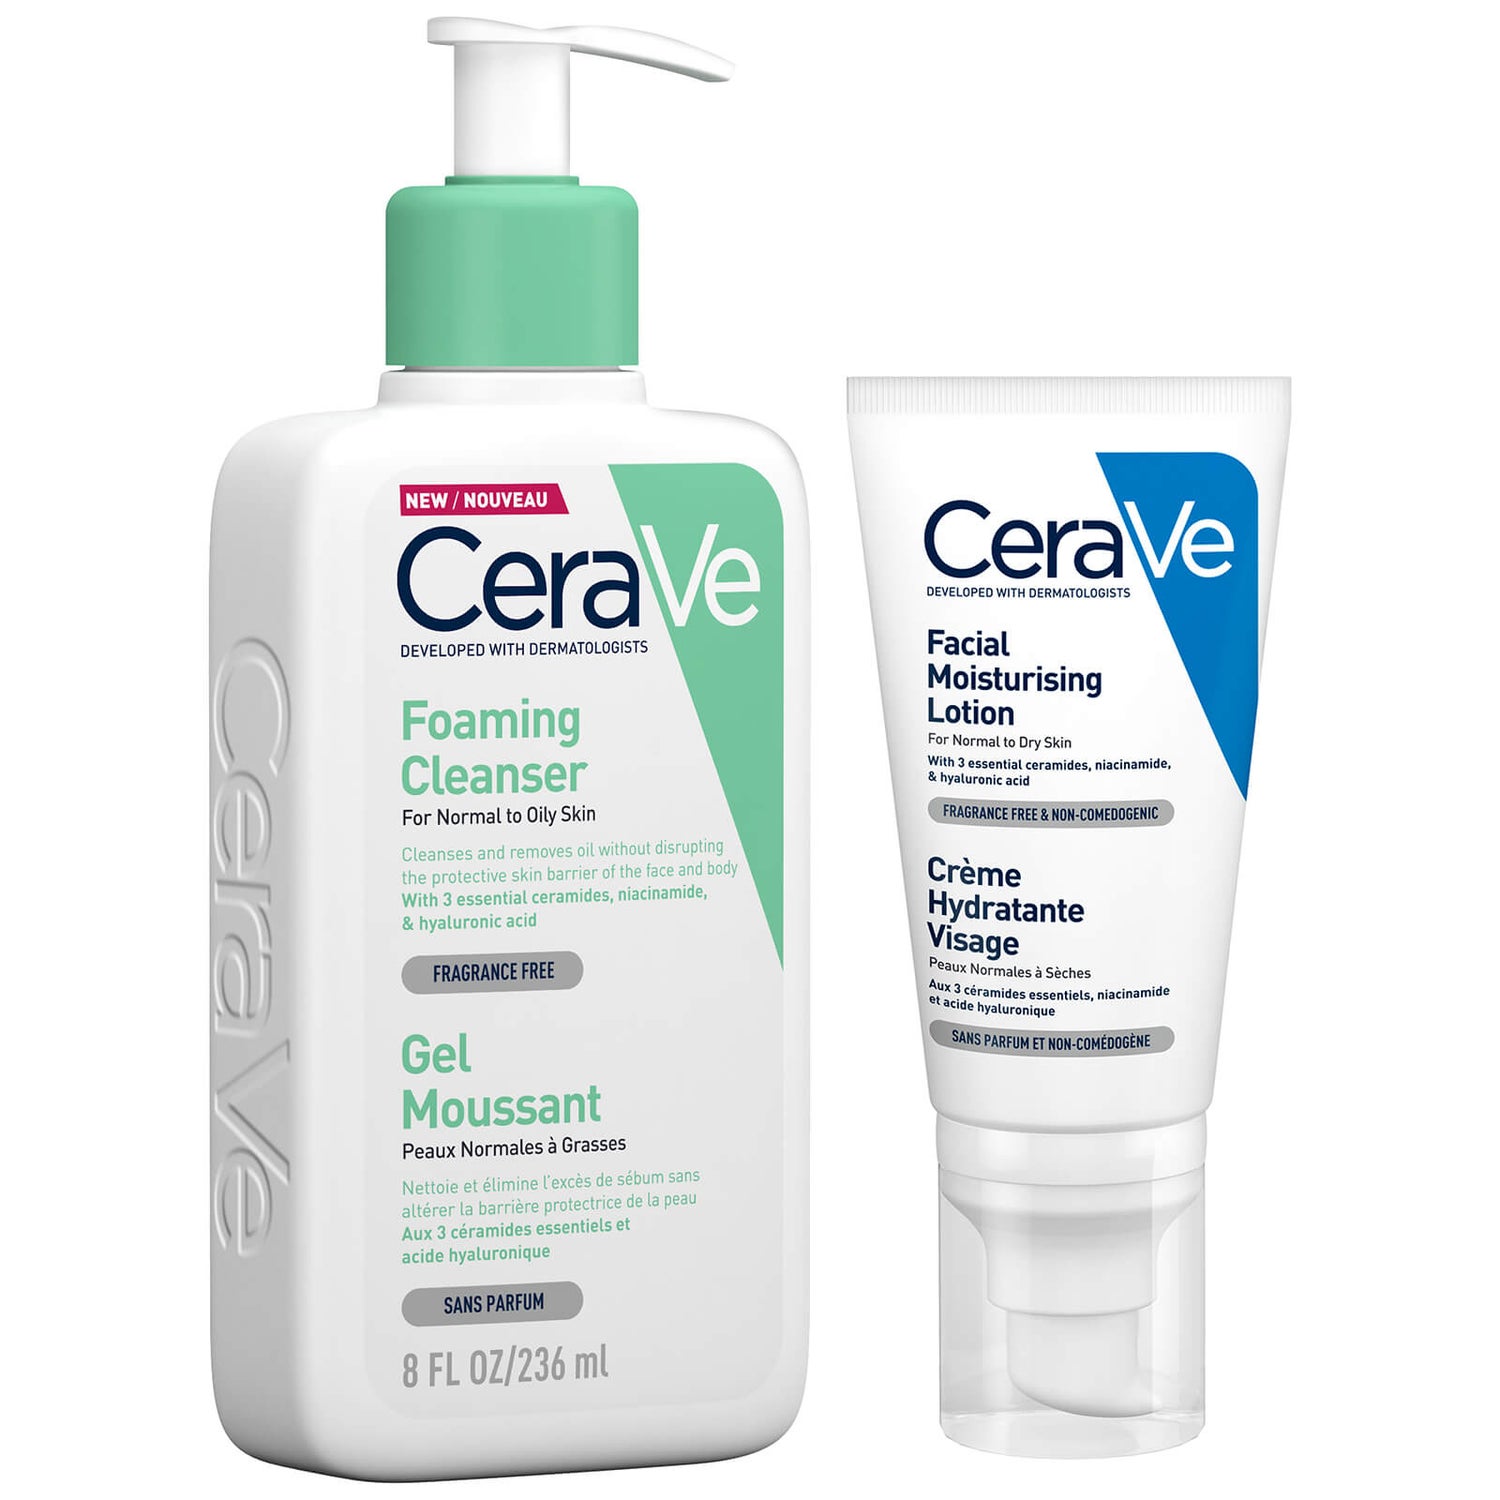 Duo Cleanse the Day Away da CeraVe